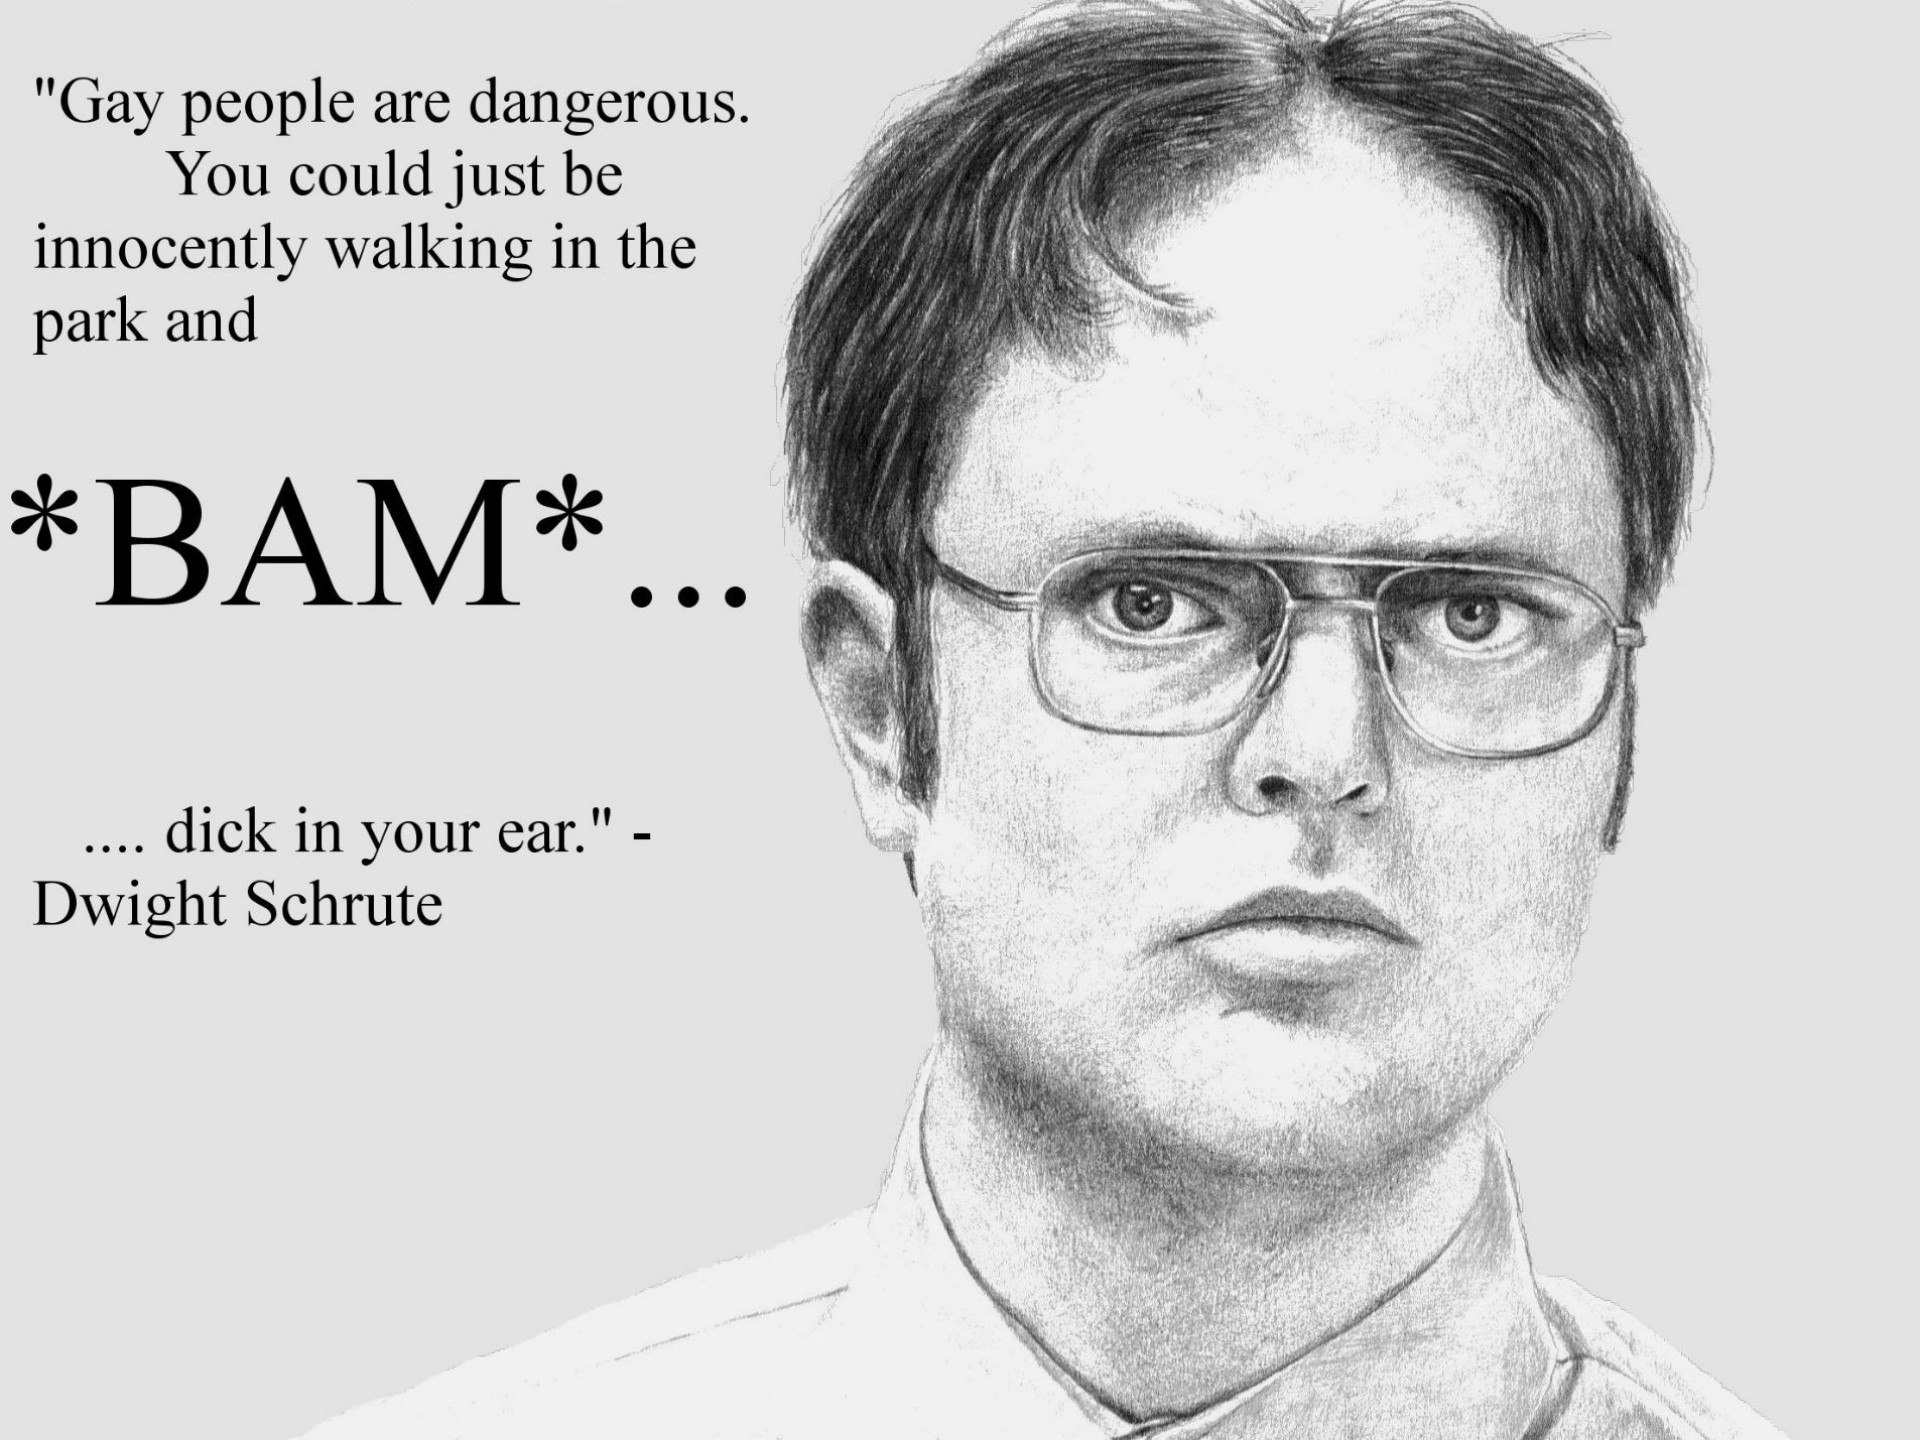 1920x1440 quotes humor, the, display, backgrounds, quotes, schrute, amazing, funny,  dwight, knowledge, cool images, office, sadic, drawings,download, gay  Wallpaper HD